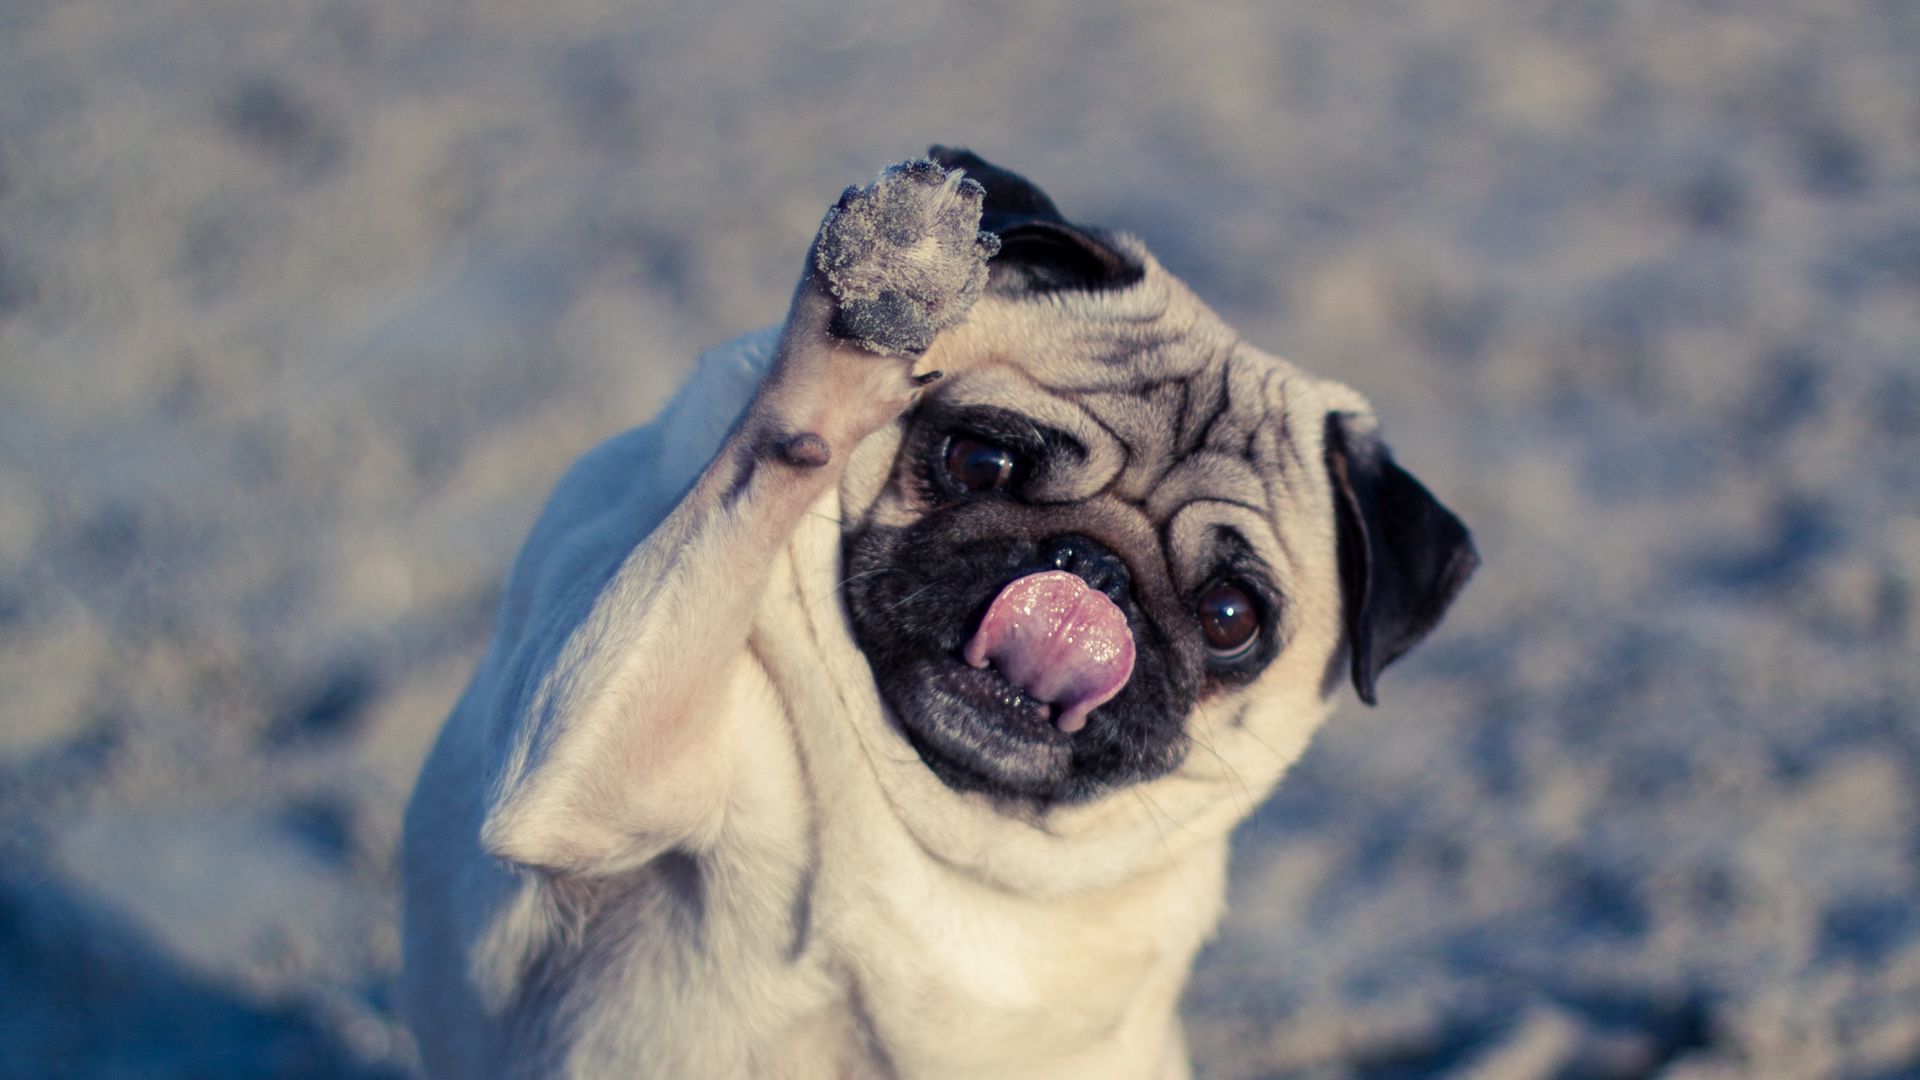 Download wallpaper 1920x1080 pug, dog, protruding tongue, funny full hd,  hdtv, fhd, 1080p hd background